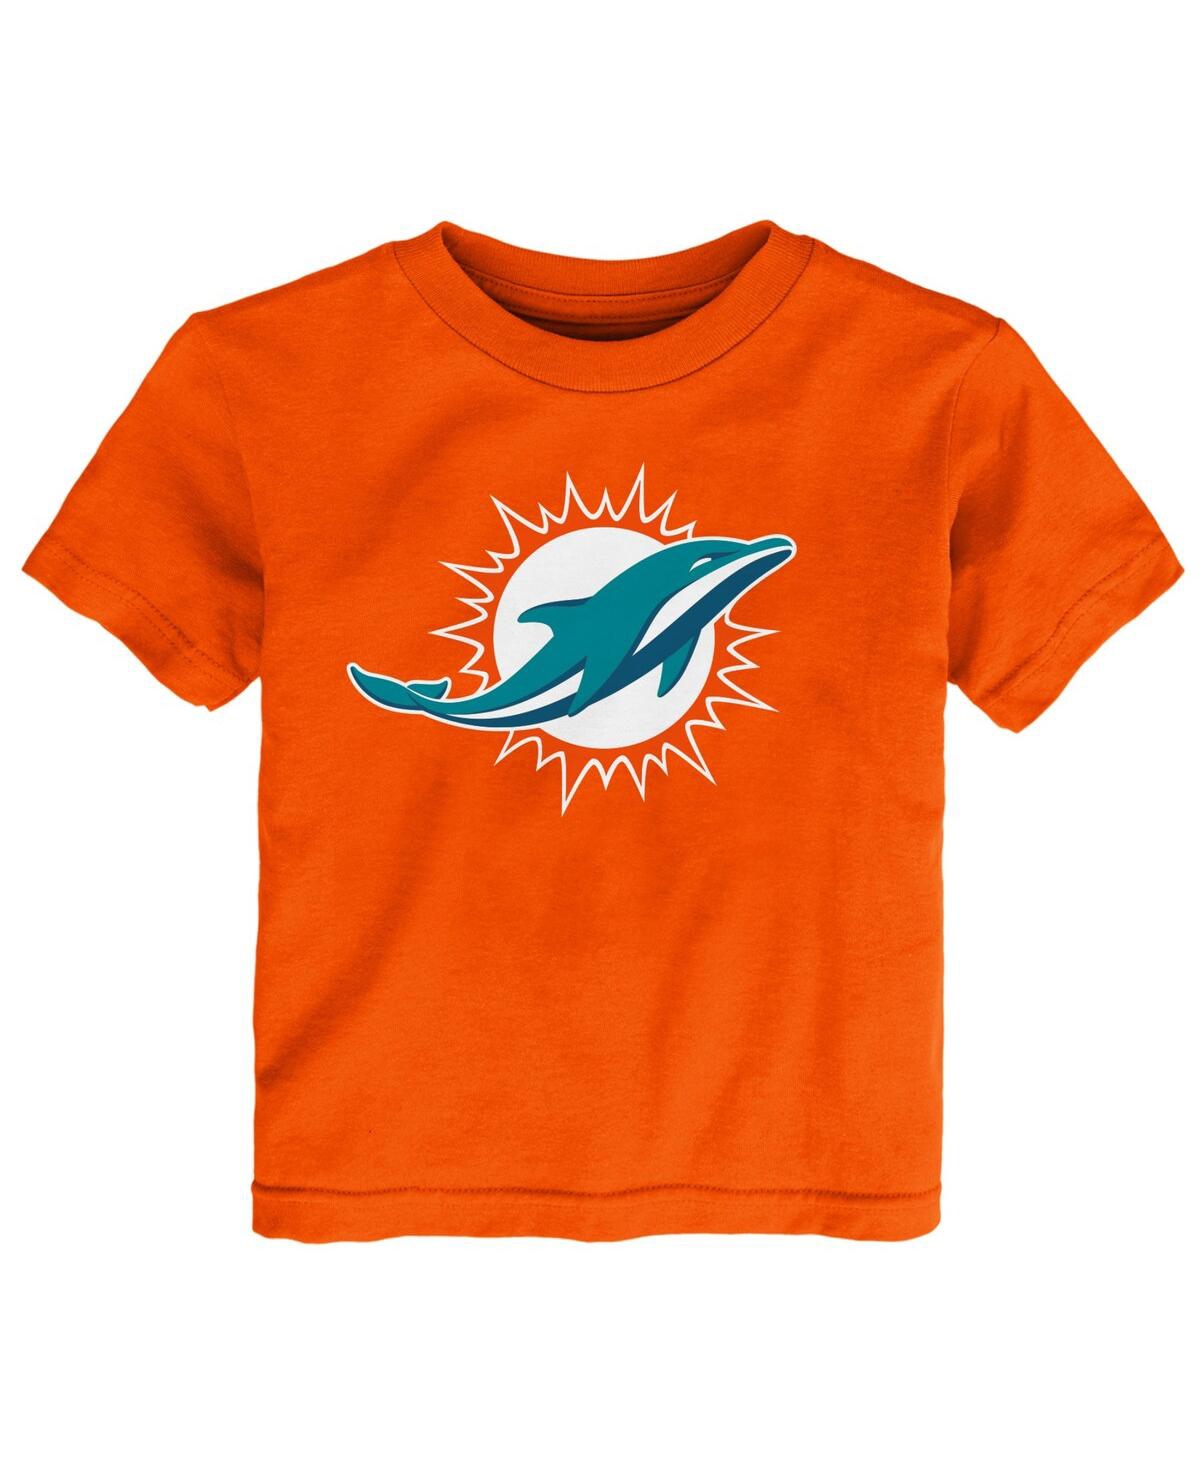 Shop Outerstuff Toddler Boys And Girls Orange Miami Dolphins Primary Logo T-shirt